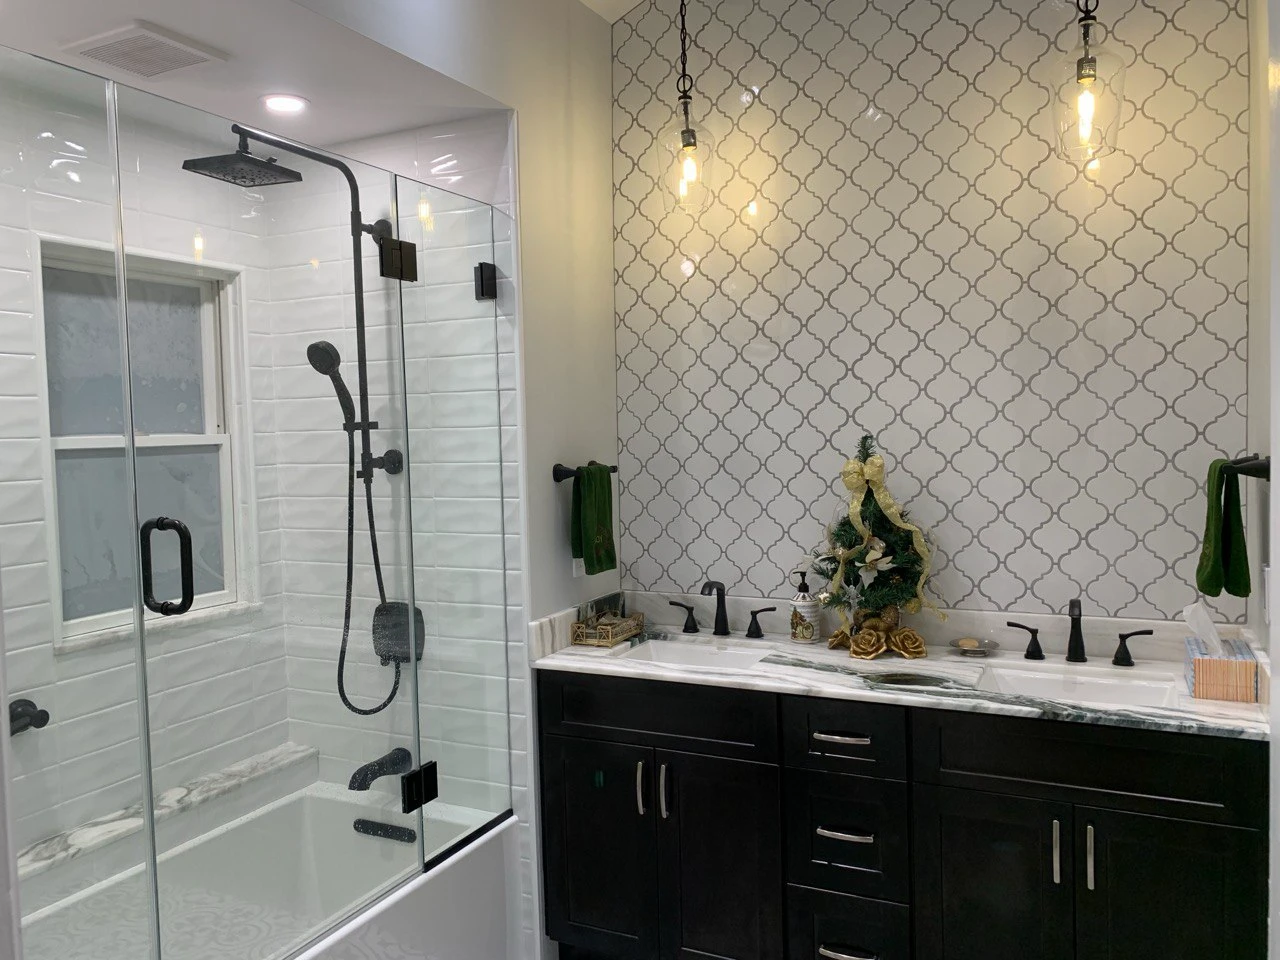 Bathroom Remodeling and Renovation Service in New York, Long Island